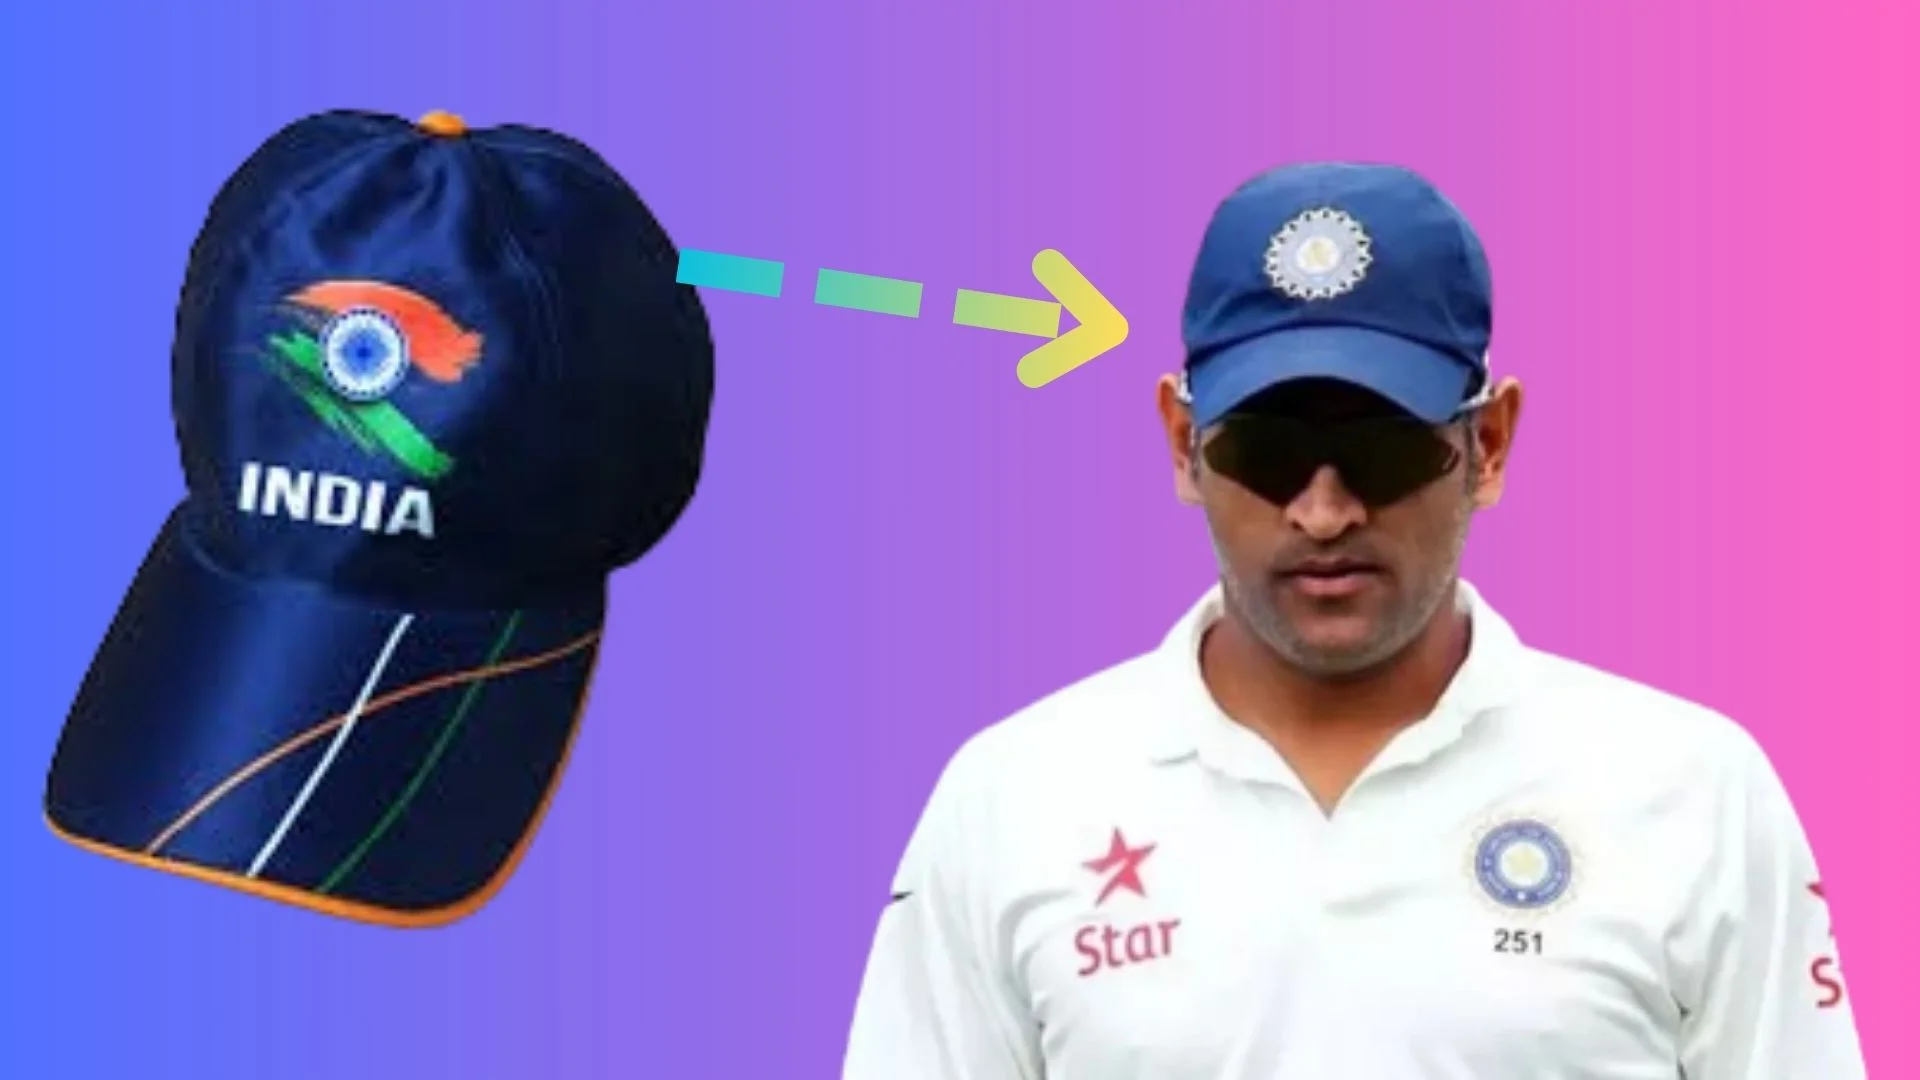 Why Cricket Players Wear Caps